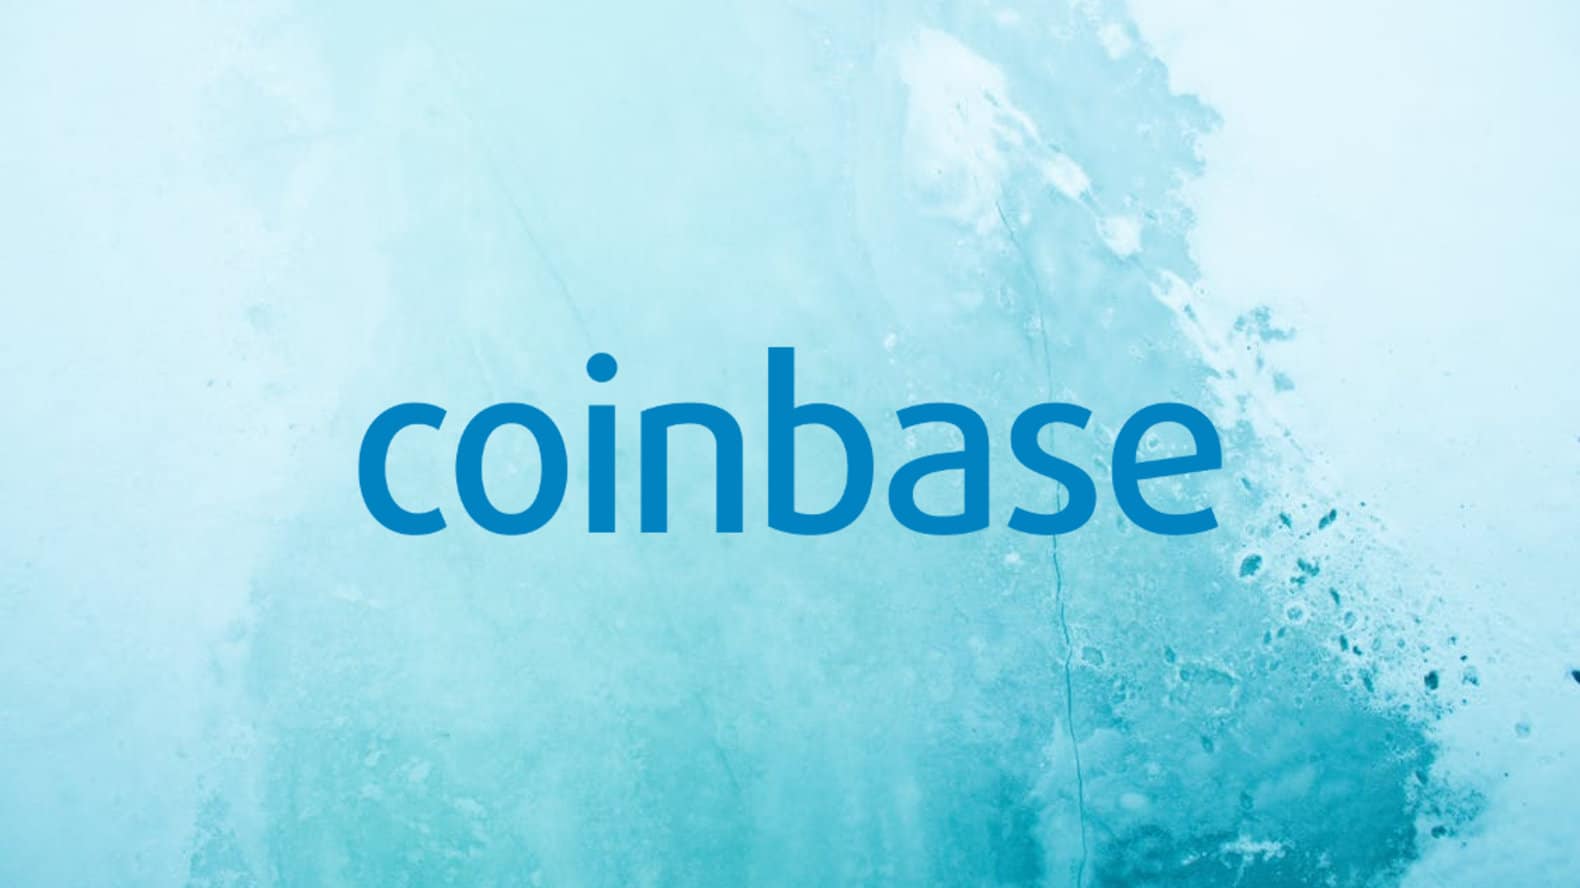 Coinbase Custody Offers Staking for Solana alongside Bison Trails